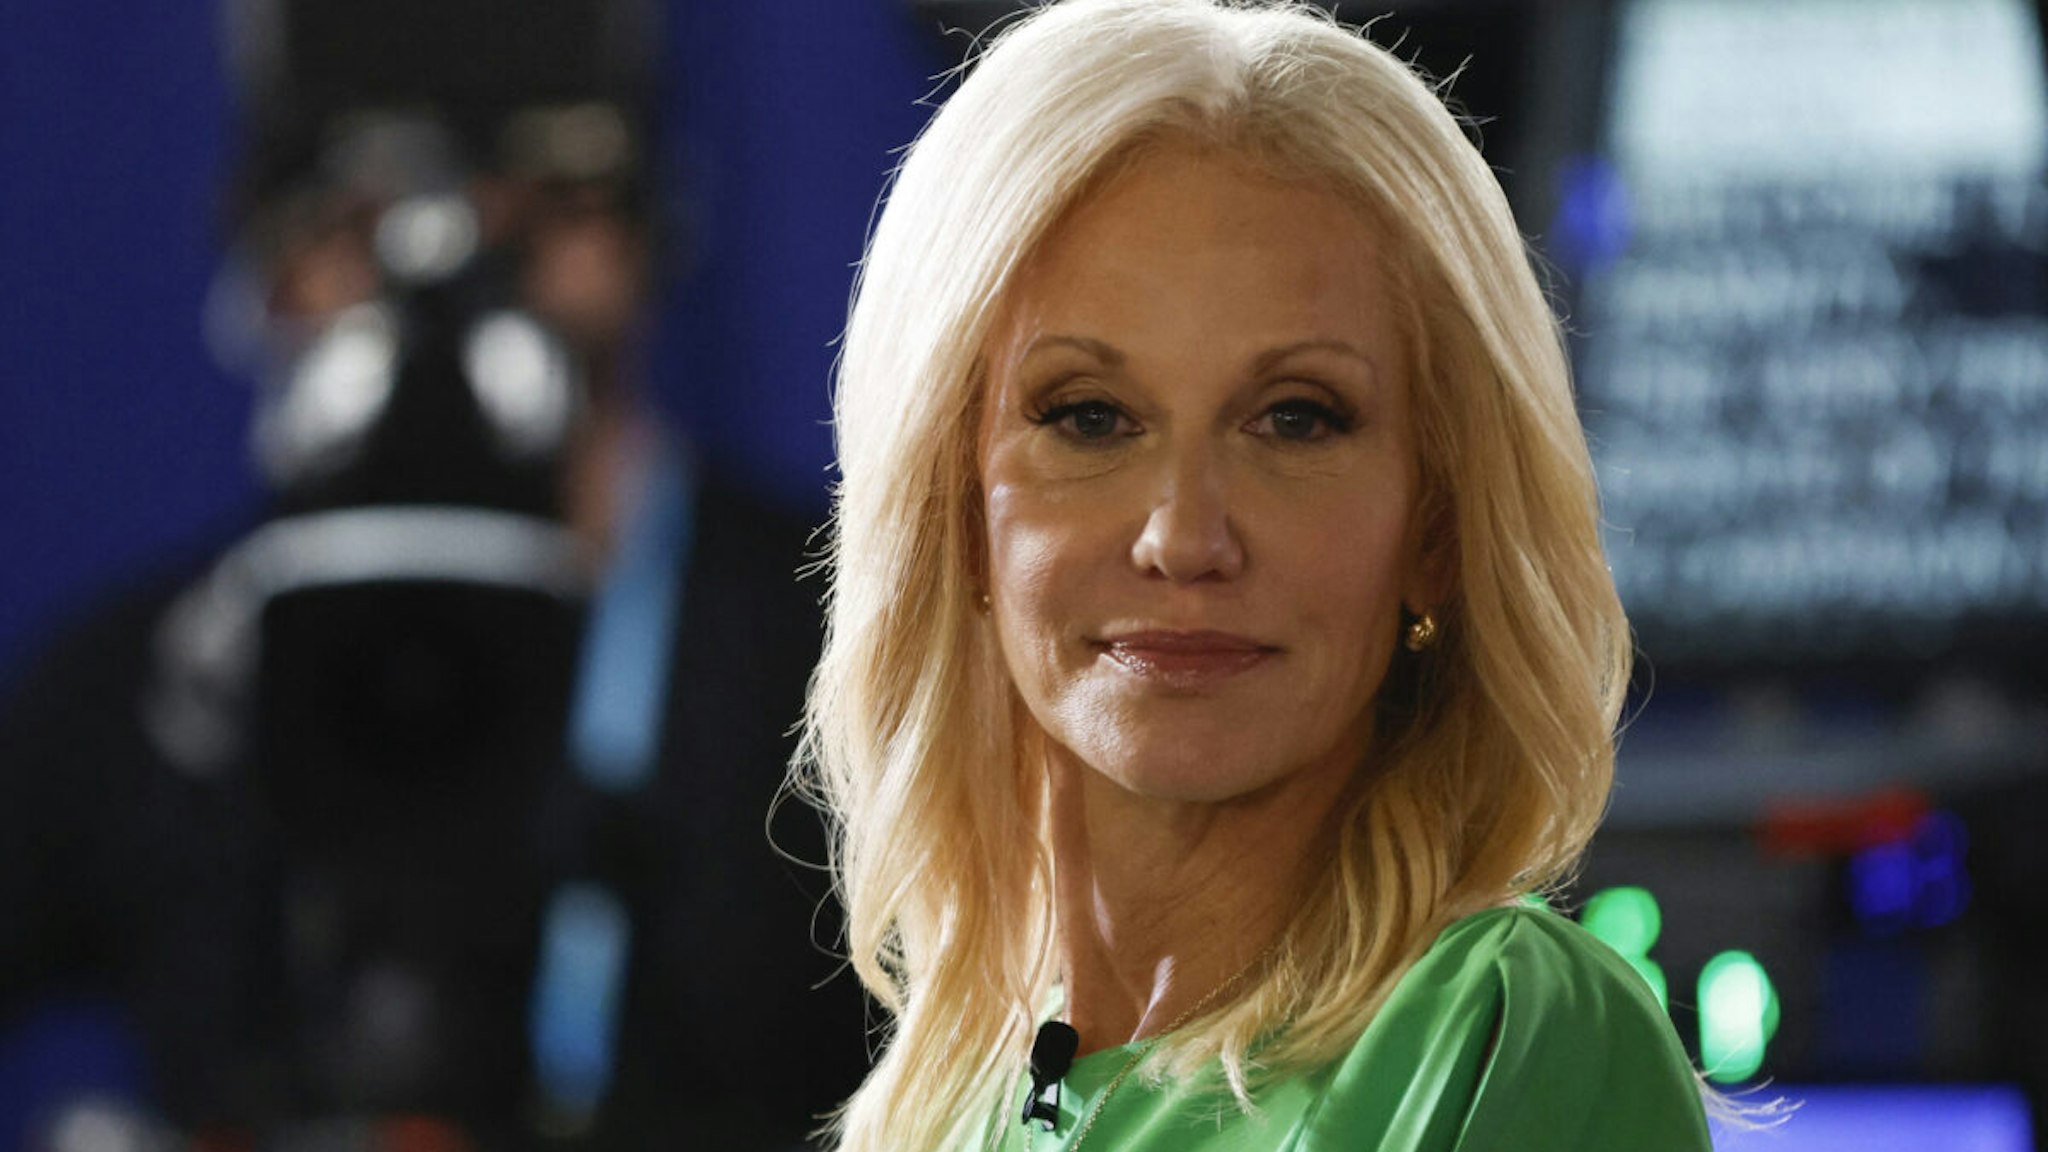 Kellyanne Conway, former Counselor to former President Trump, looks on in the Spin Room during the first Republican Presidential primary debate at the Fiserv Forum in Milwaukee, Wisconsin, on August 23, 2023.